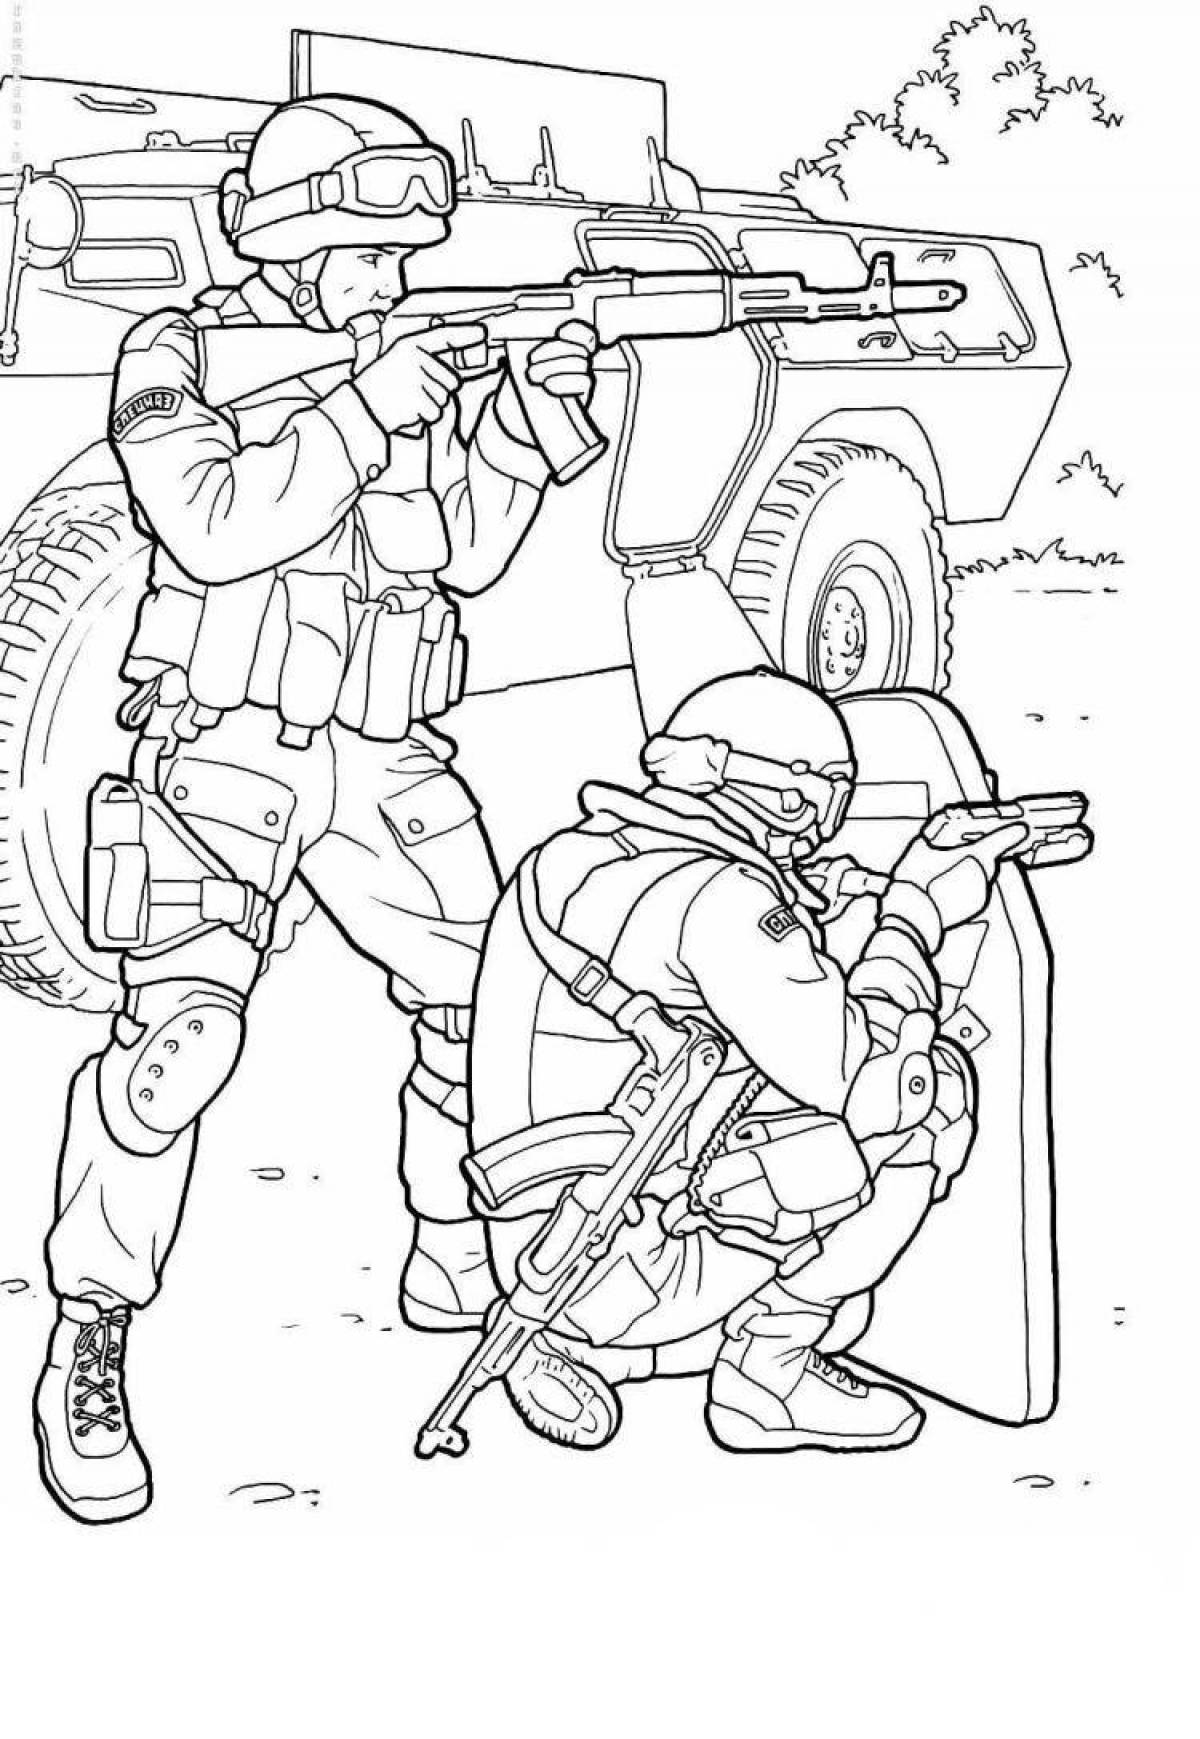 Colorful special forces coloring page for kids